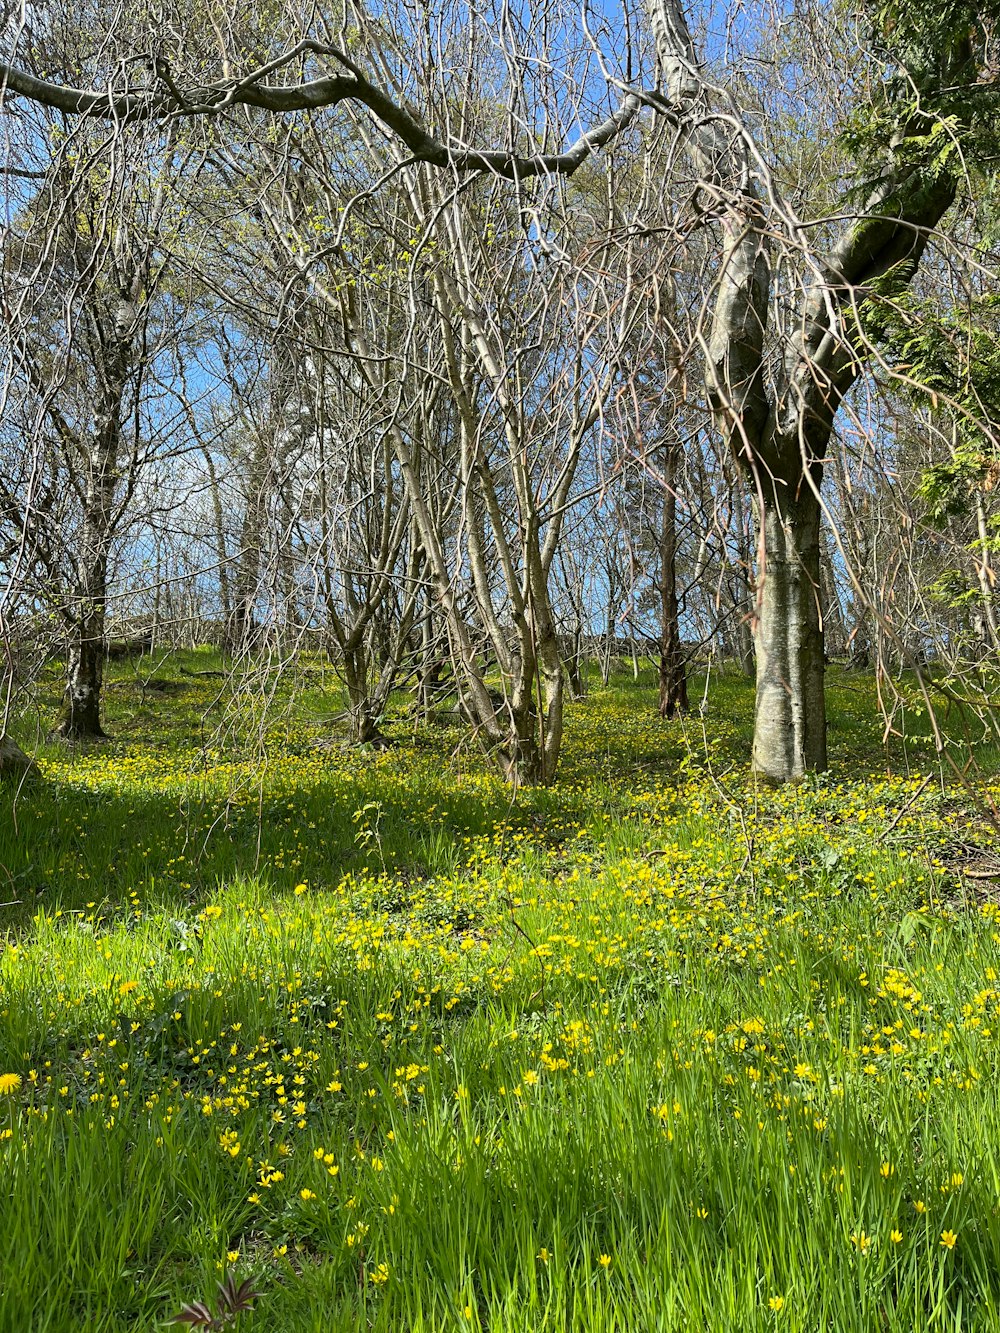 a grassy field with trees and yellow flowers